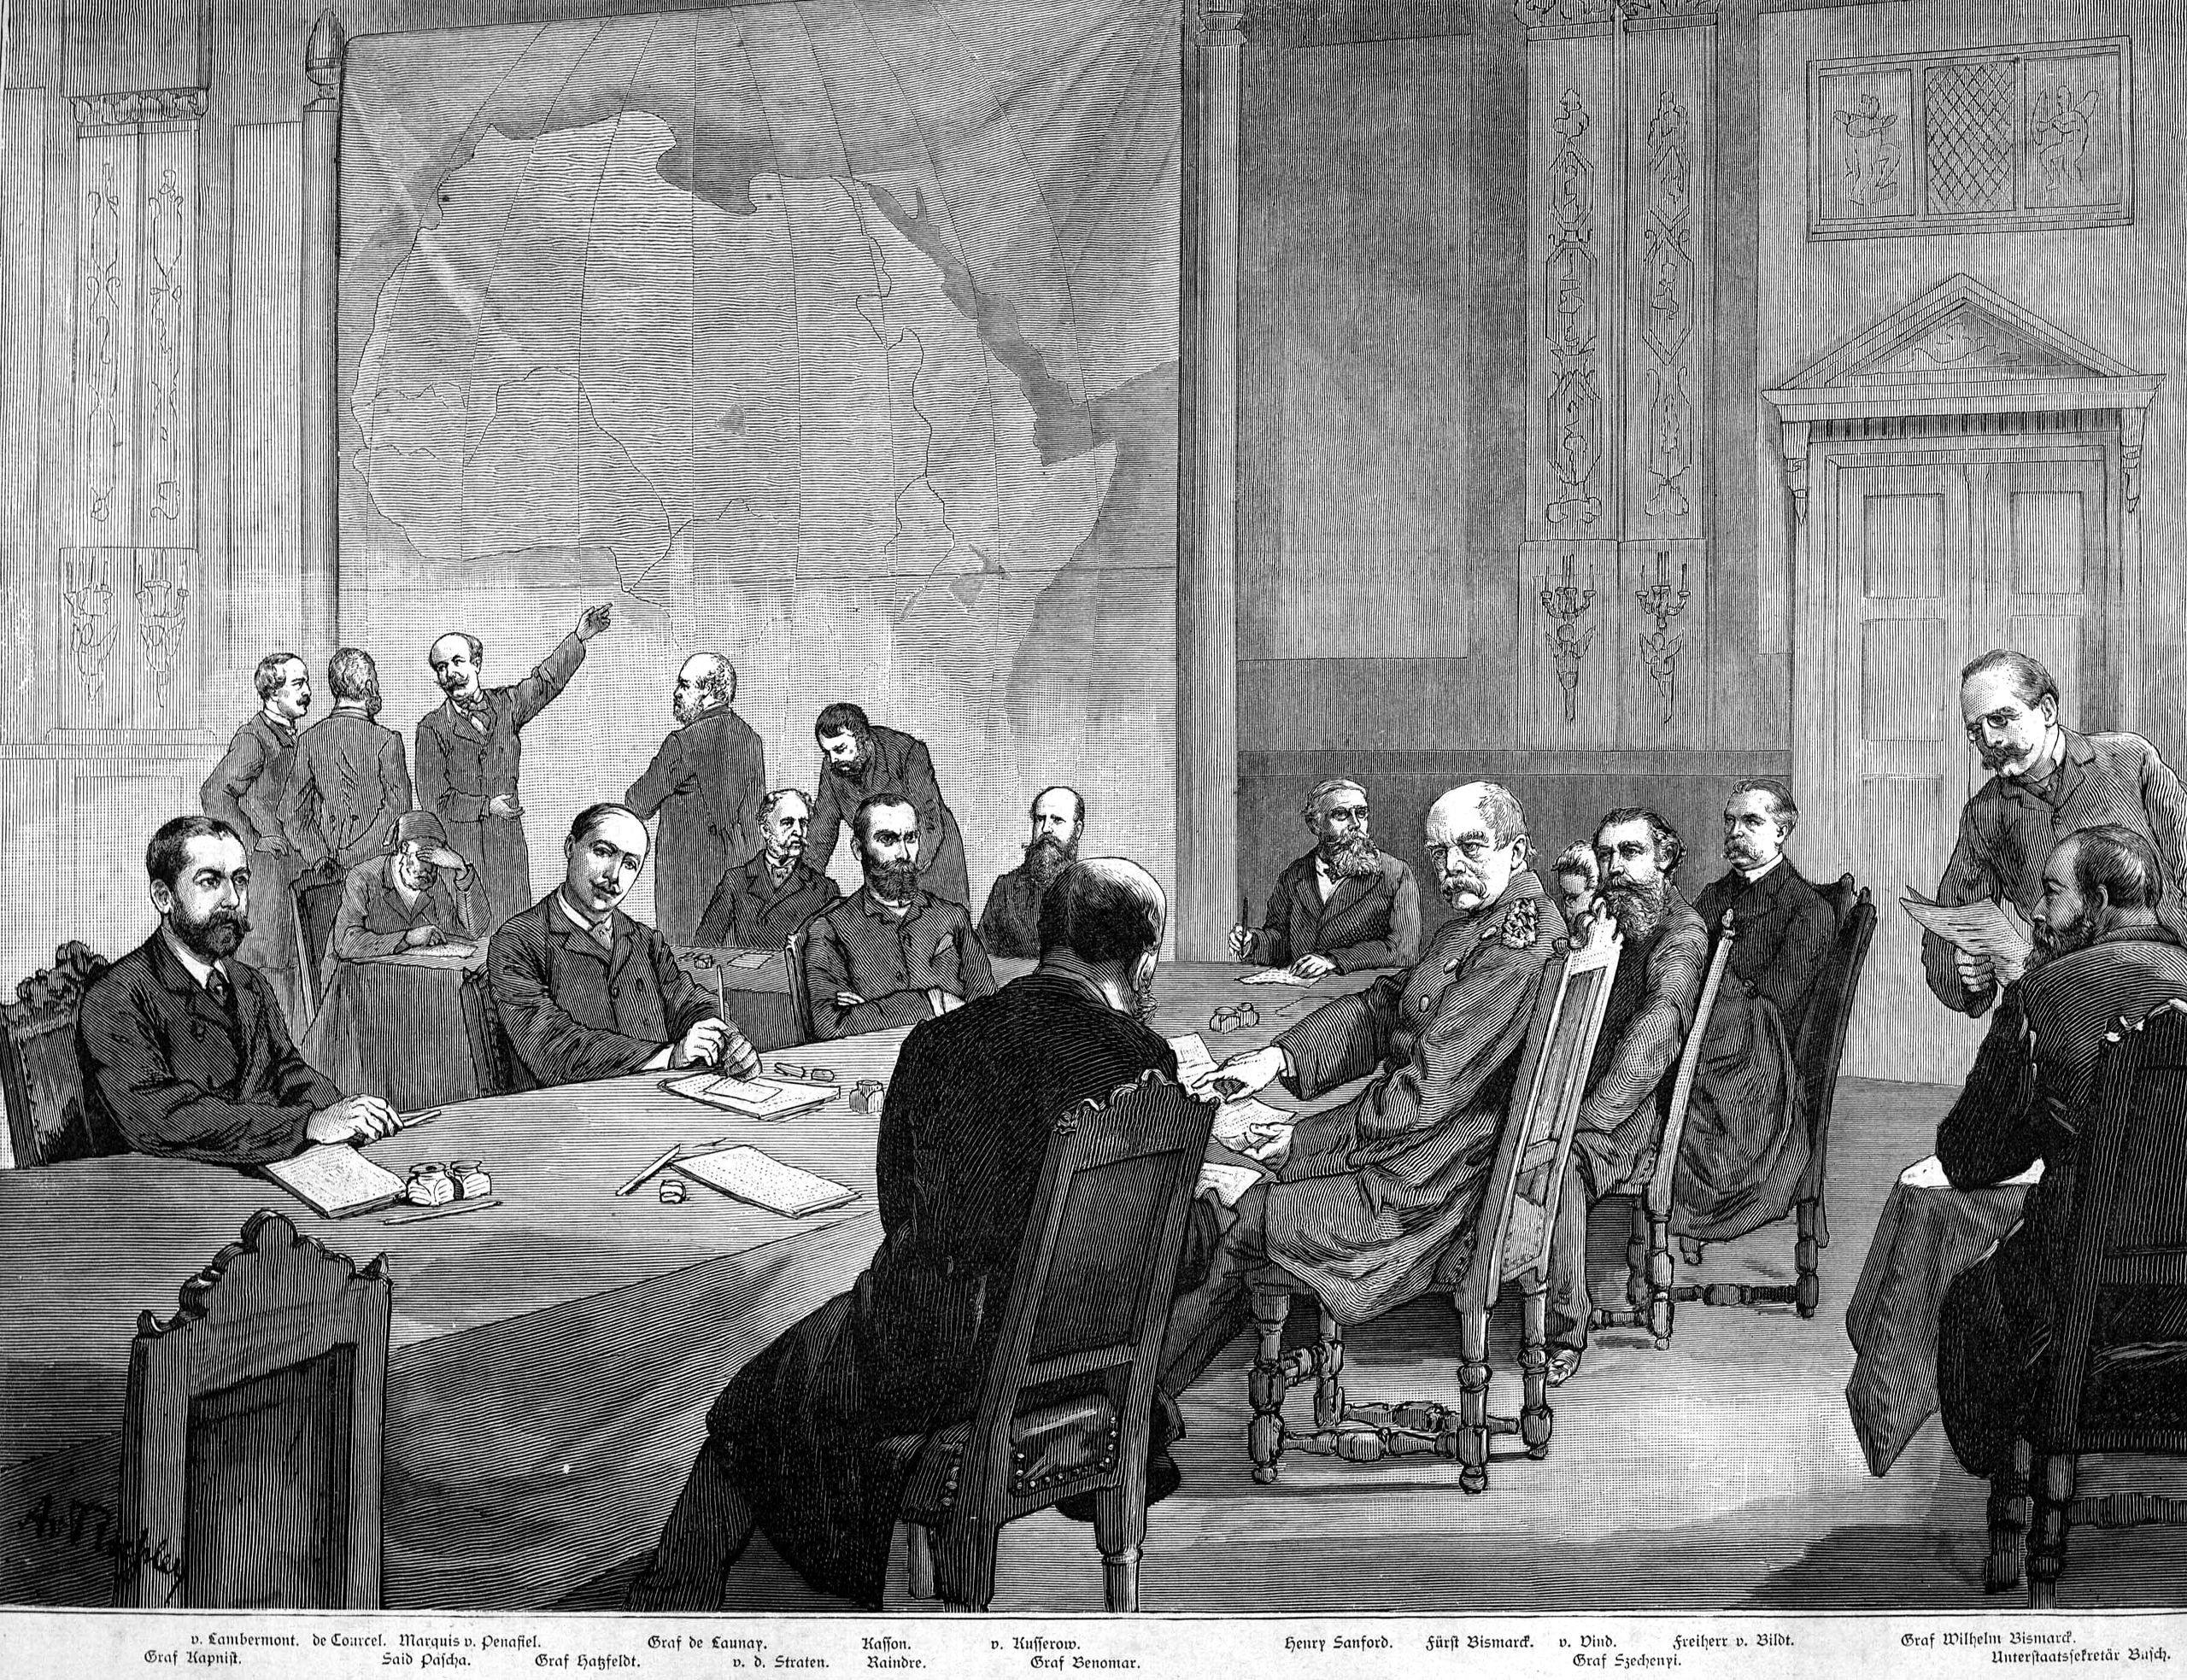 The conference of Berlin, as illustrated in "Illustrierte Zeitung"